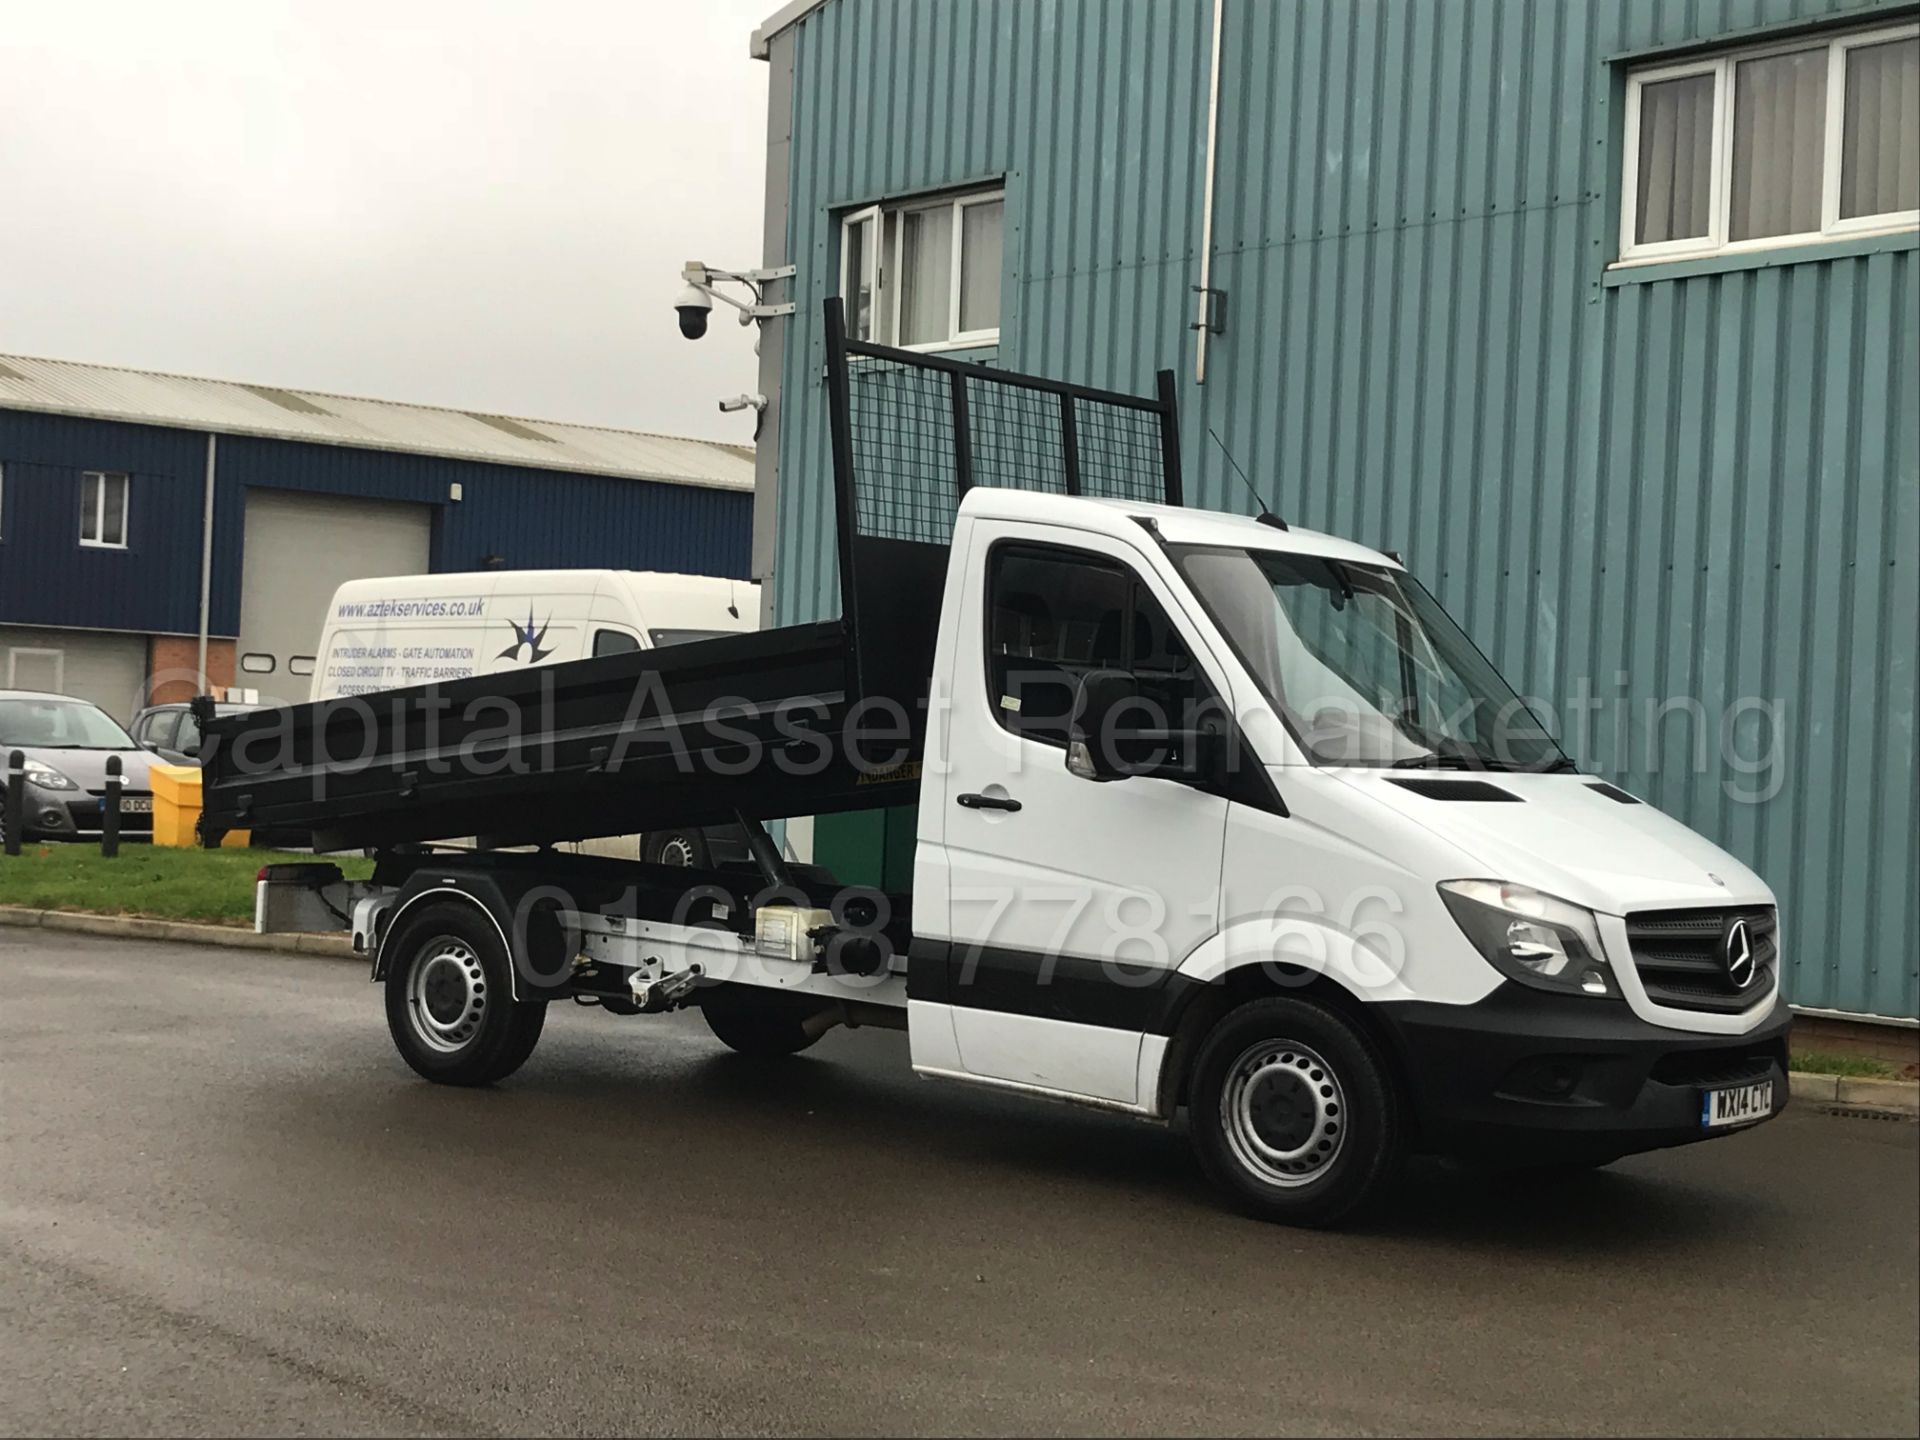 (ON SALE) MERCEDES-BENZ SPRINTER 313 CDI 'LWB - TIPPER' (2014 FACELIFT) '130 BHP -6 SPEED' *1 OWNER* - Image 7 of 24